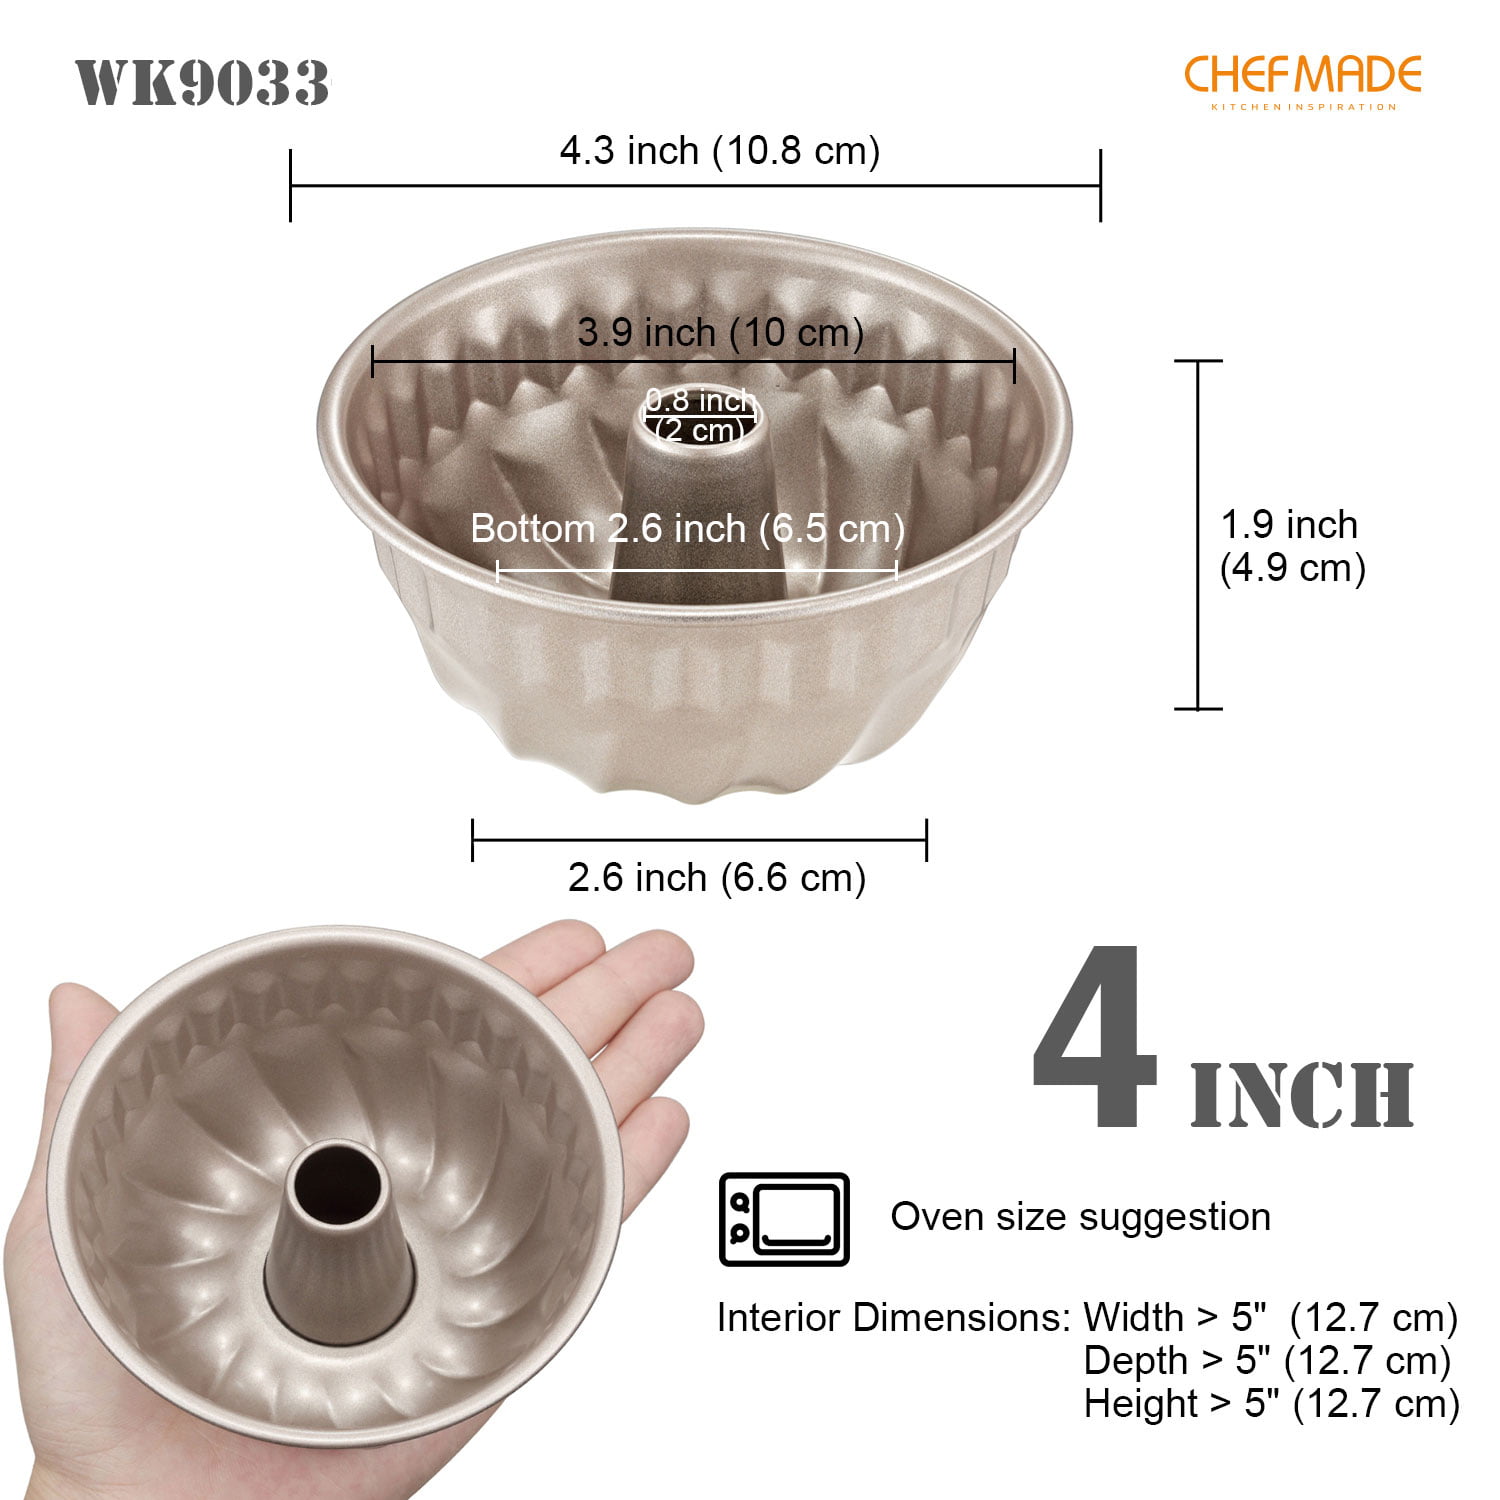 CHEFMADE Tube Cake Pan, 6.5-Inch Non-Stick Vortex-Shaped Tube Pan Kugelhopf  Mold for Oven and Instant Pot Baking (Champagne Gold)